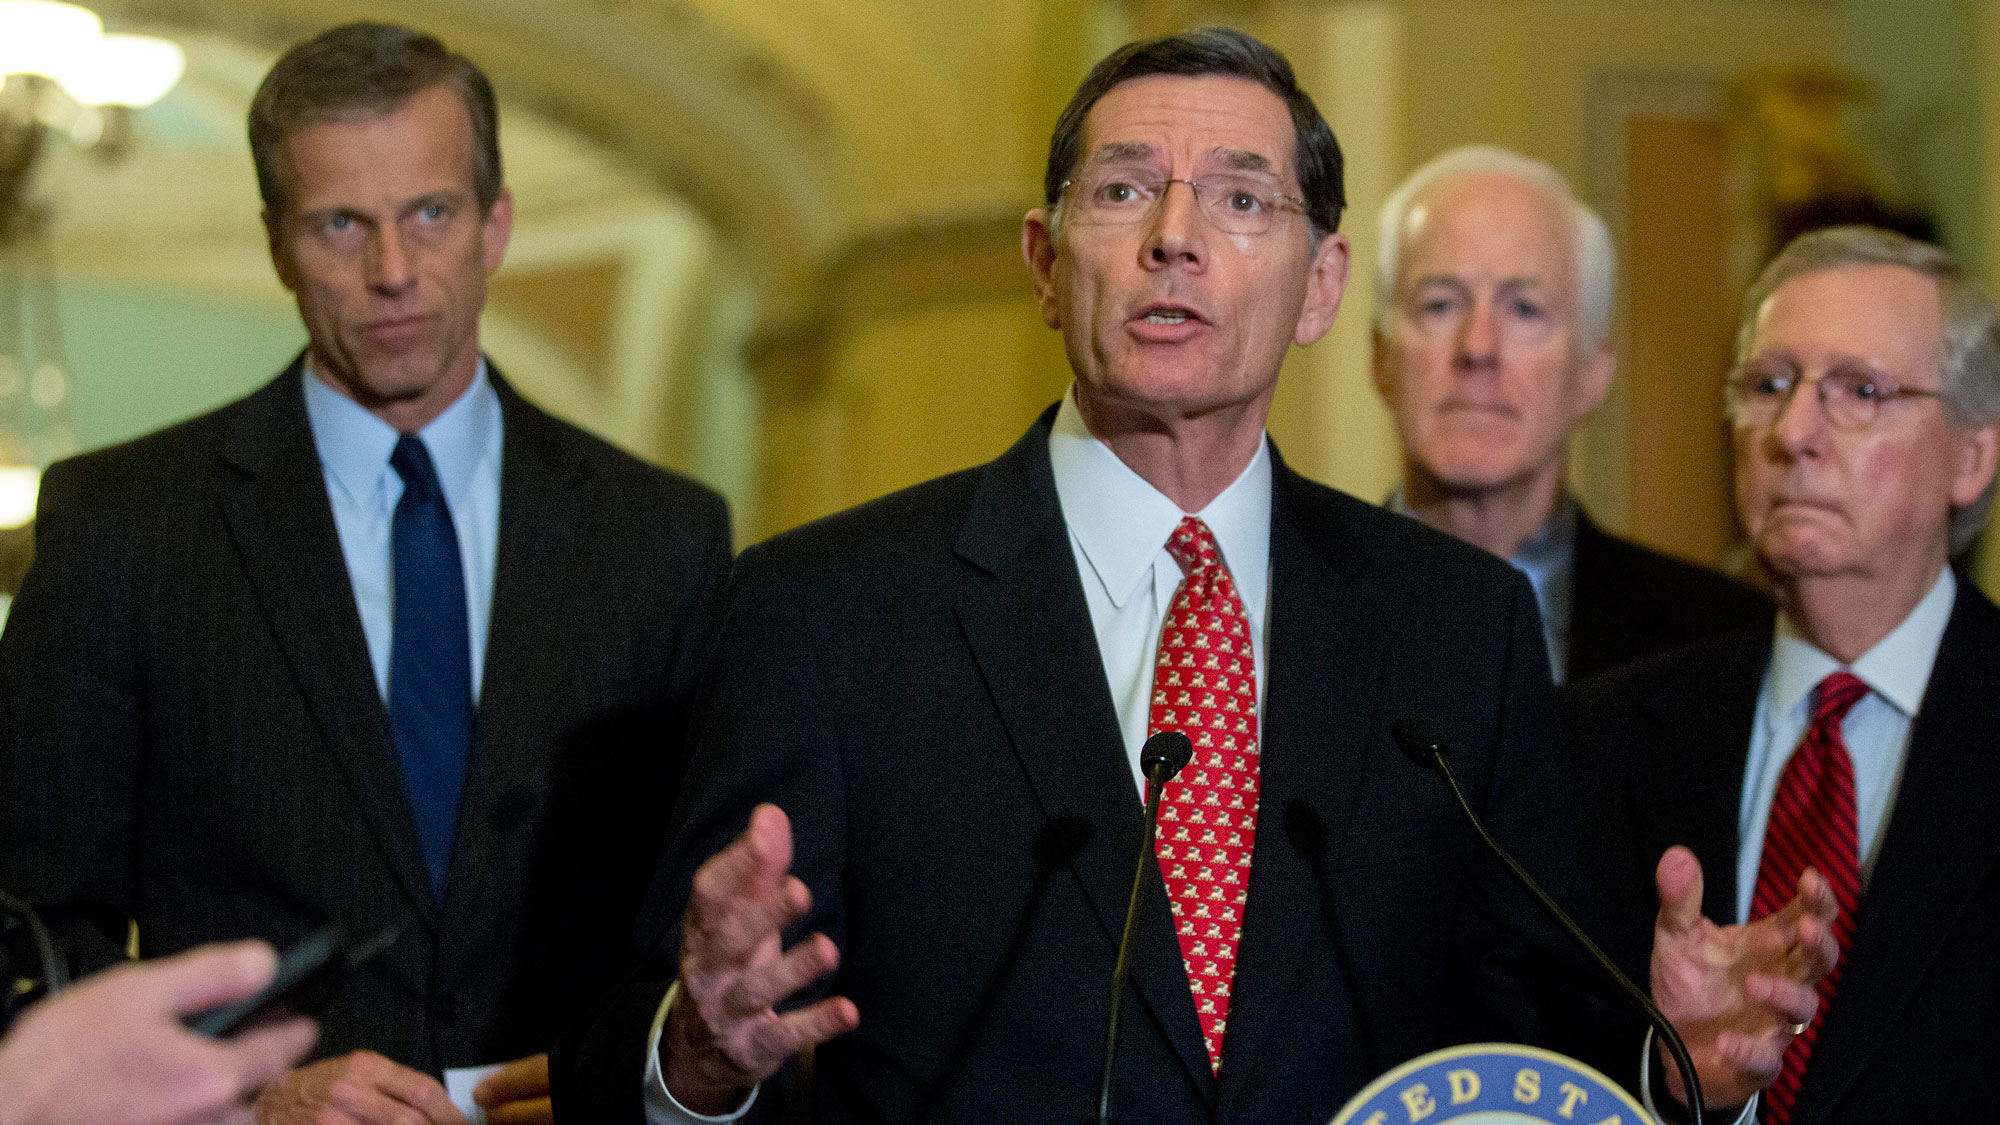 Senator John Barrasso, a Republican from Wyoming, center, speaks during a news conference following a Senate luncheon at the U.S. Capitol with John Thune, a Republican from South Dakota, from left, Barrasso, John Thune, a Republican from South Dakota, and Senate Majority Leader Mitch McConnell, a Republican from Kentucky, in Washington, D.C., U.S., on Tuesday, Feb. 24, 2015. 
